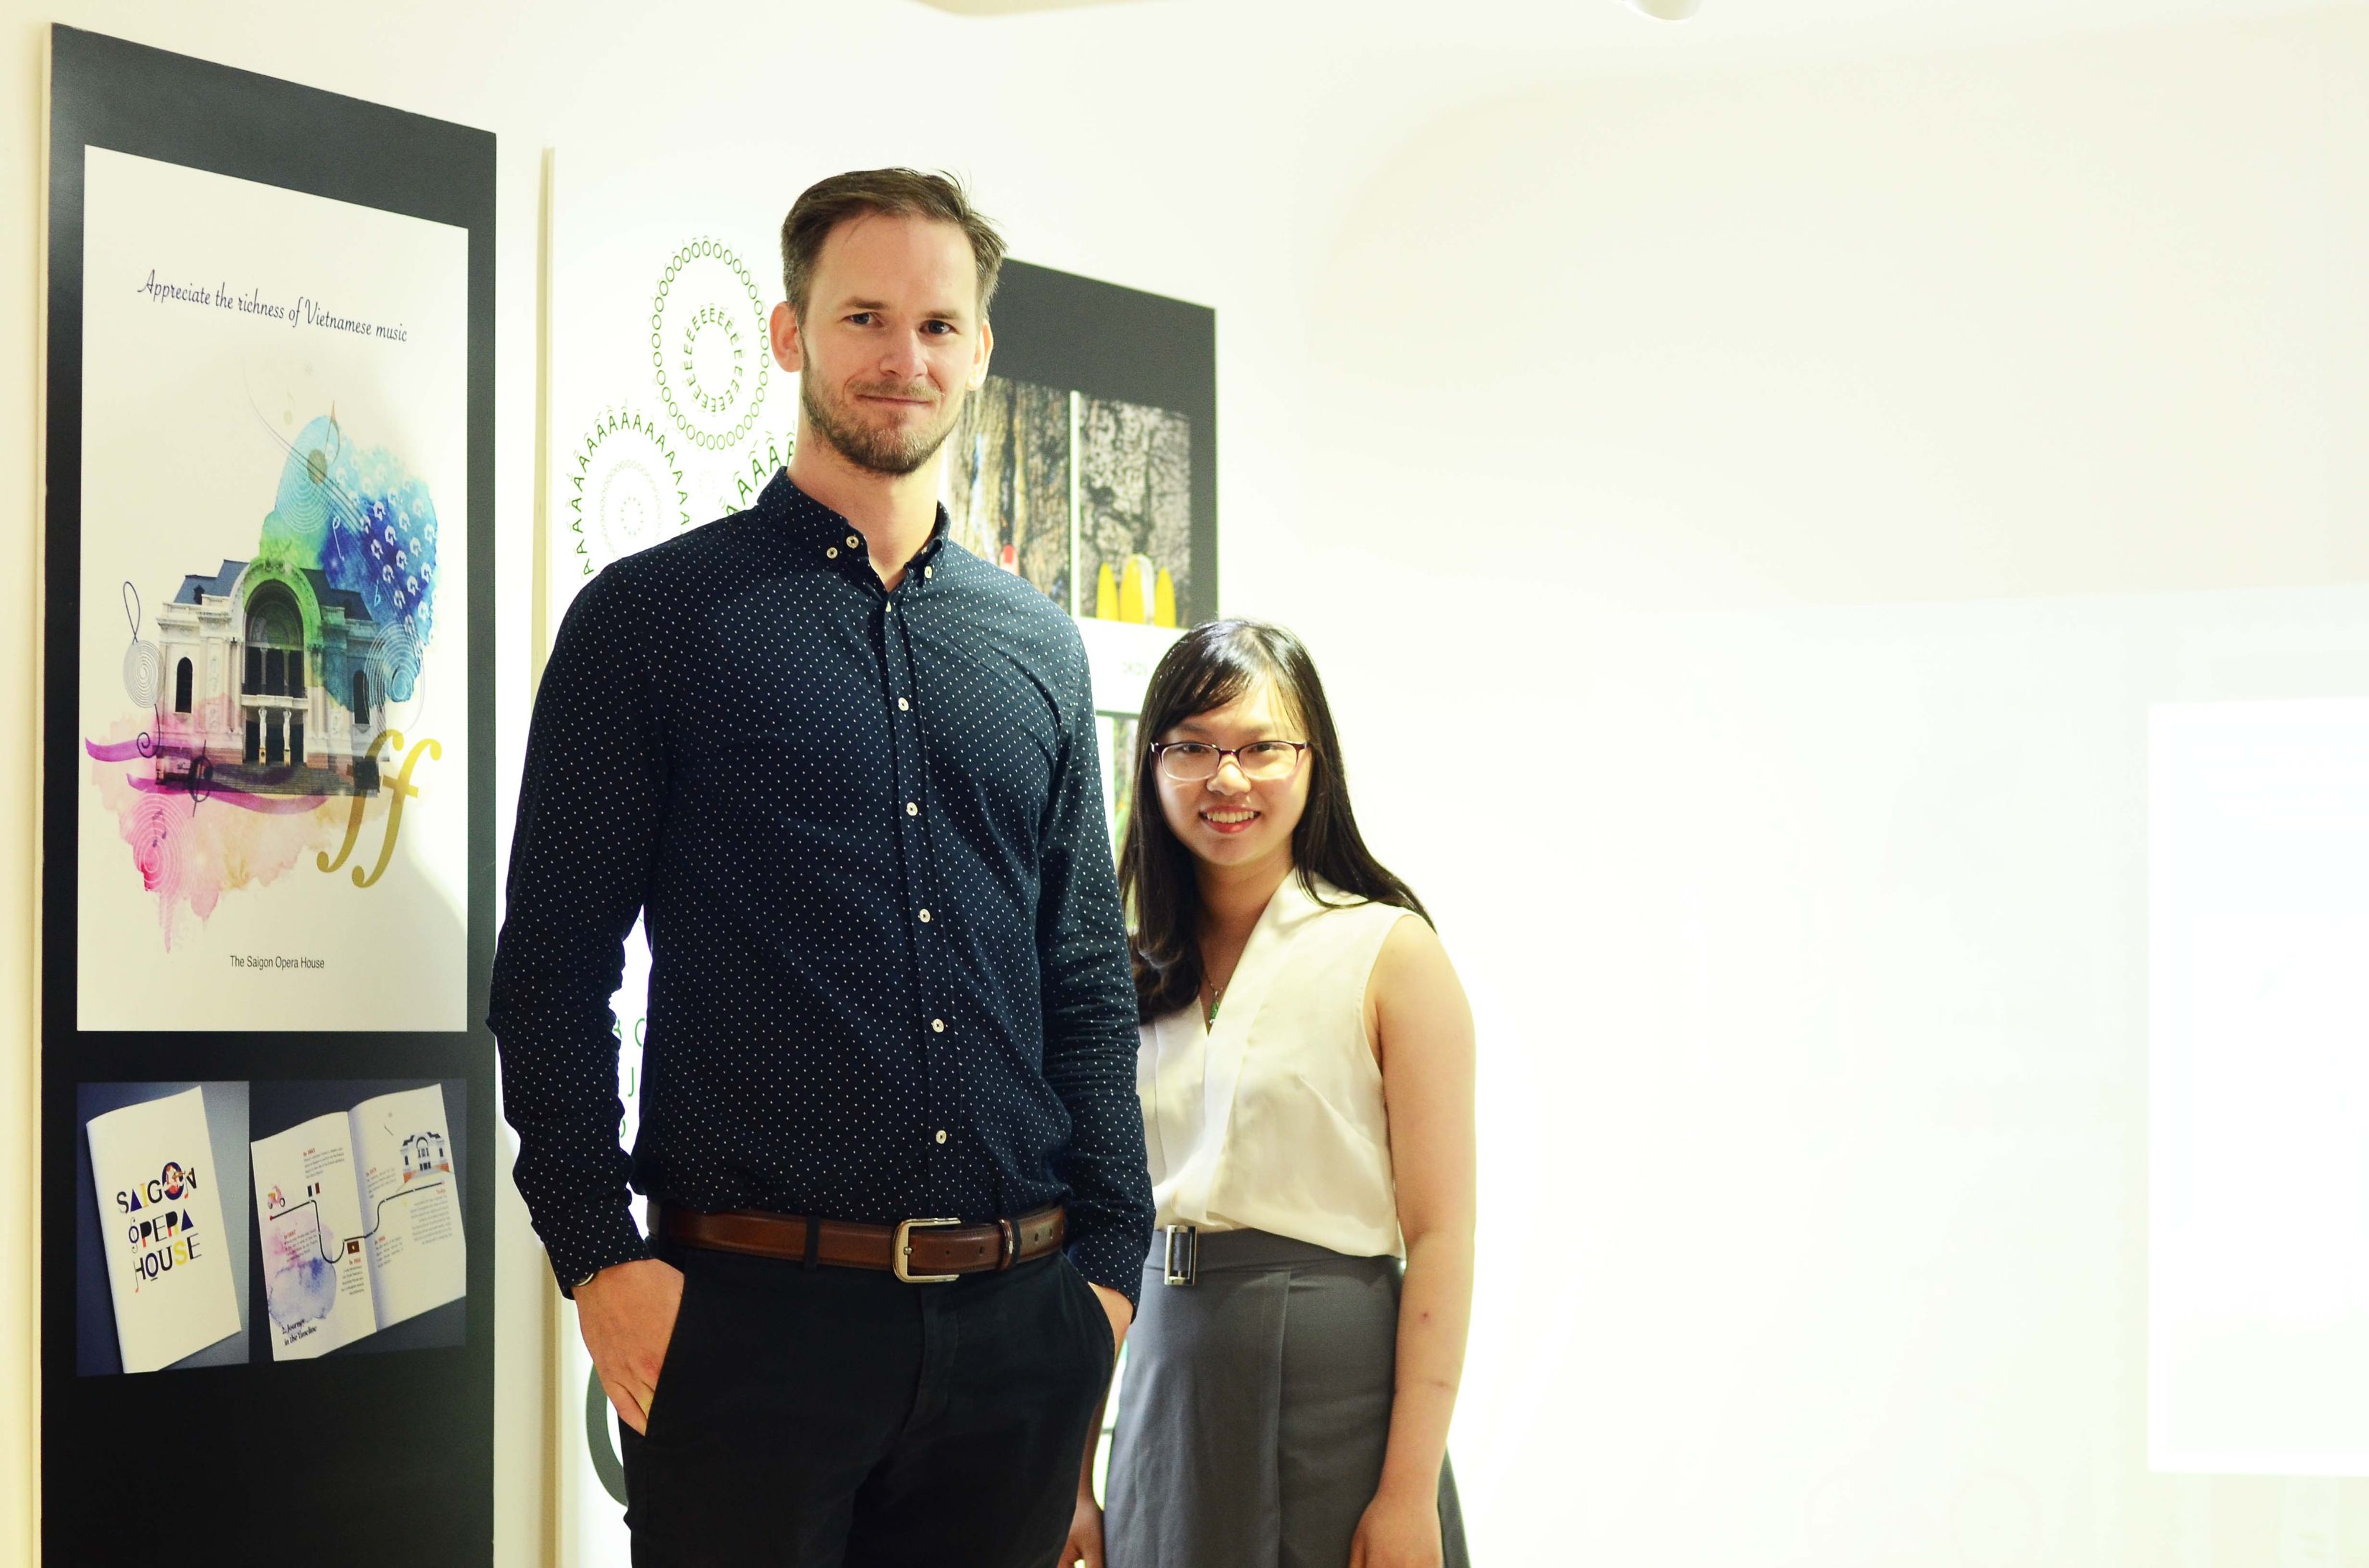 Mr Ben Waters, Managing Director of Lion&Lion, attended the showcase with an RMIT alumnus who now works at Lion&Lion.